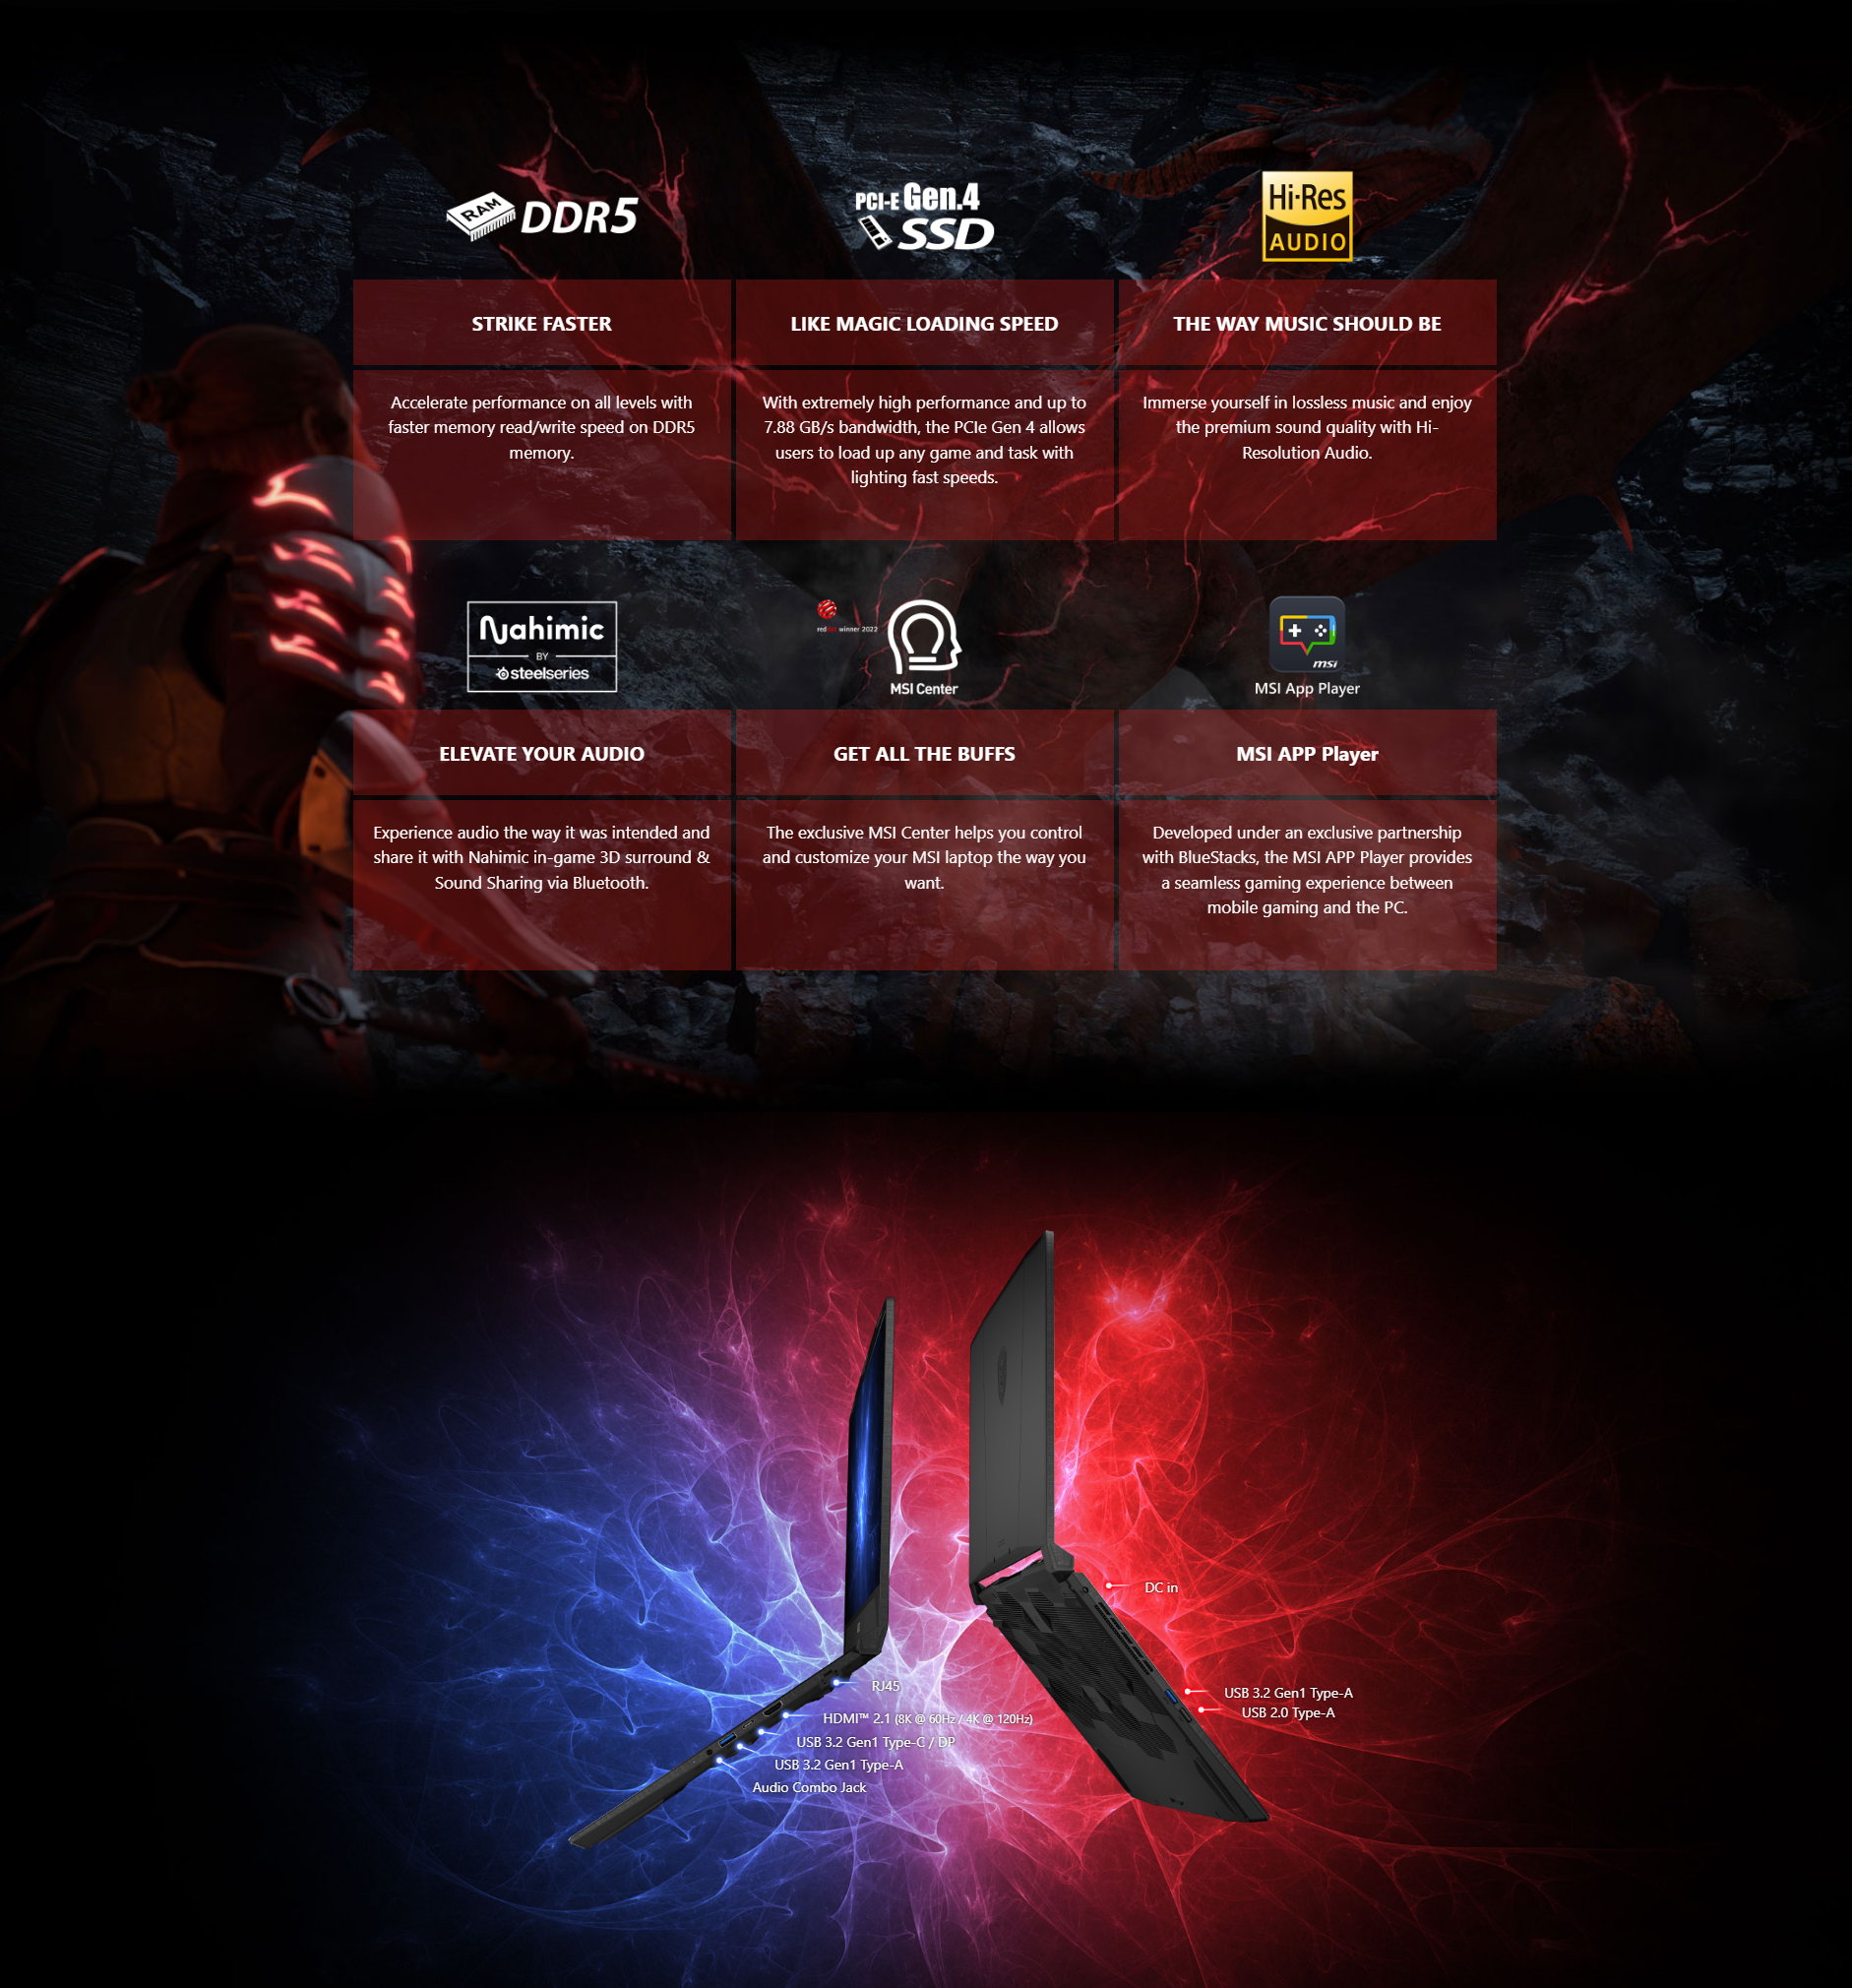 A large marketing image providing additional information about the product MSI Katana 15 (B13V) - 15.6" 144Hz, 13th Gen i9, RTX 4060, 16GB/512GB - Win 11 Gaming Notebook - Additional alt info not provided